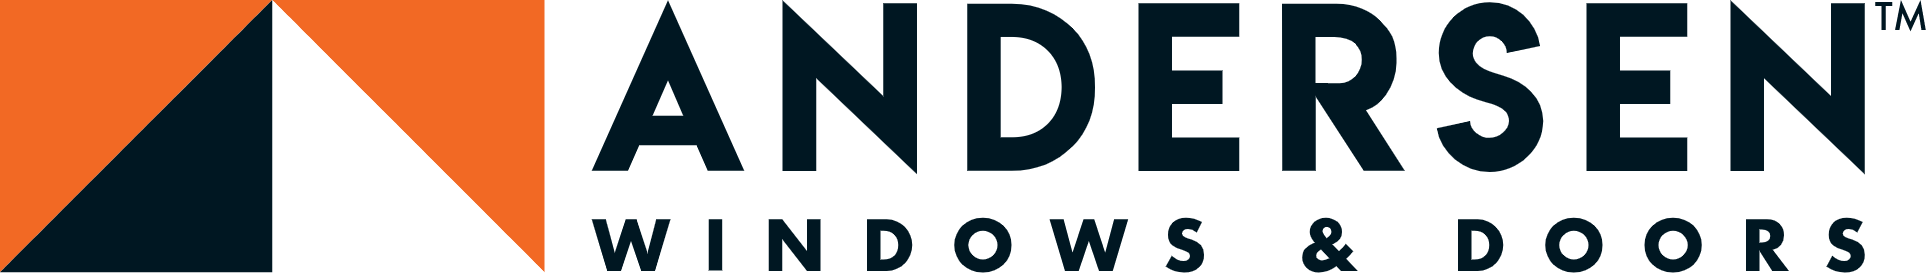 A black and blue logo for the national endowment for the arts.